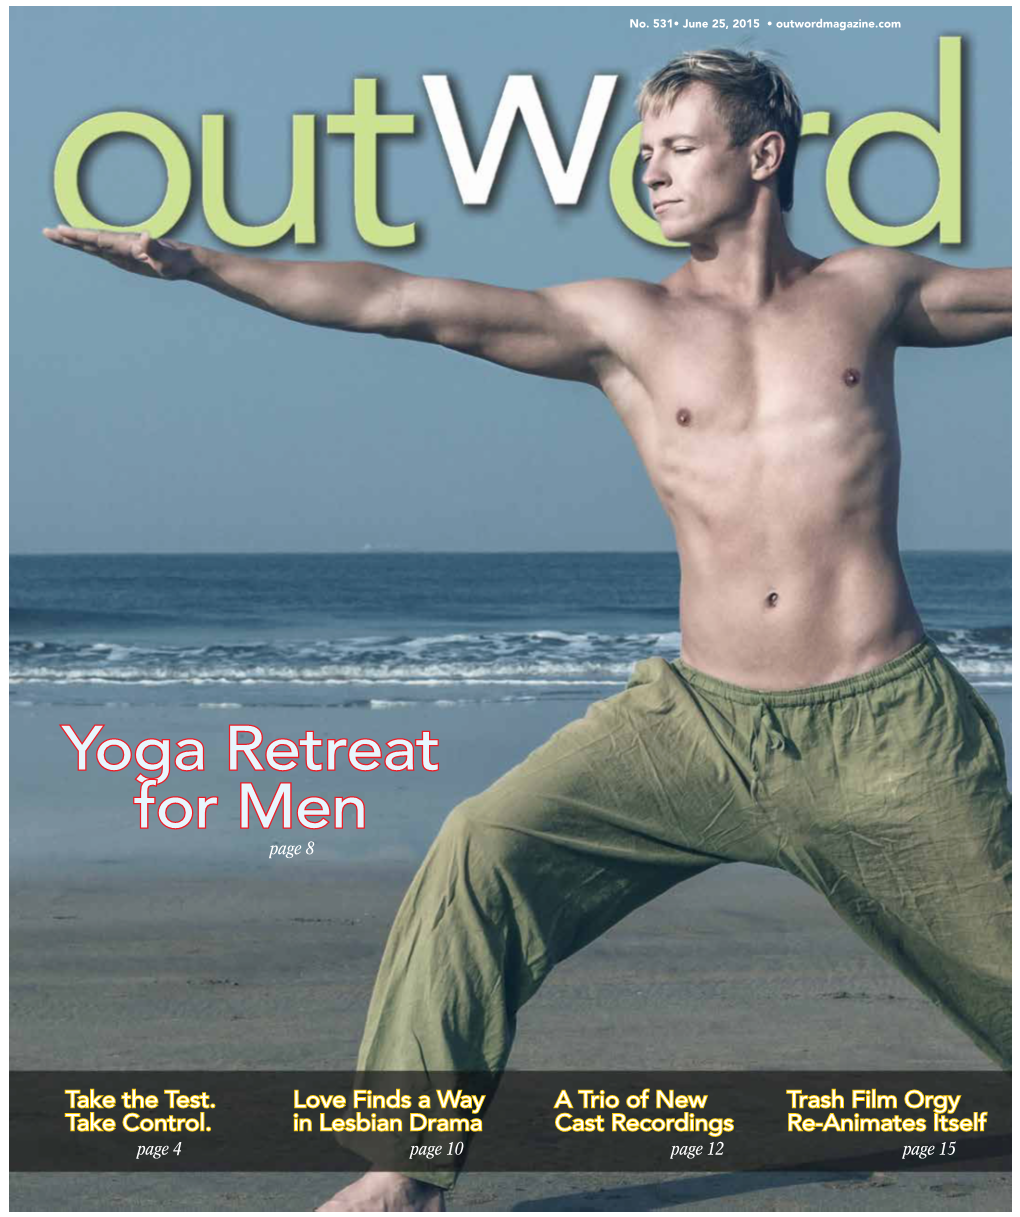 Yoga Retreat for Men Page 8